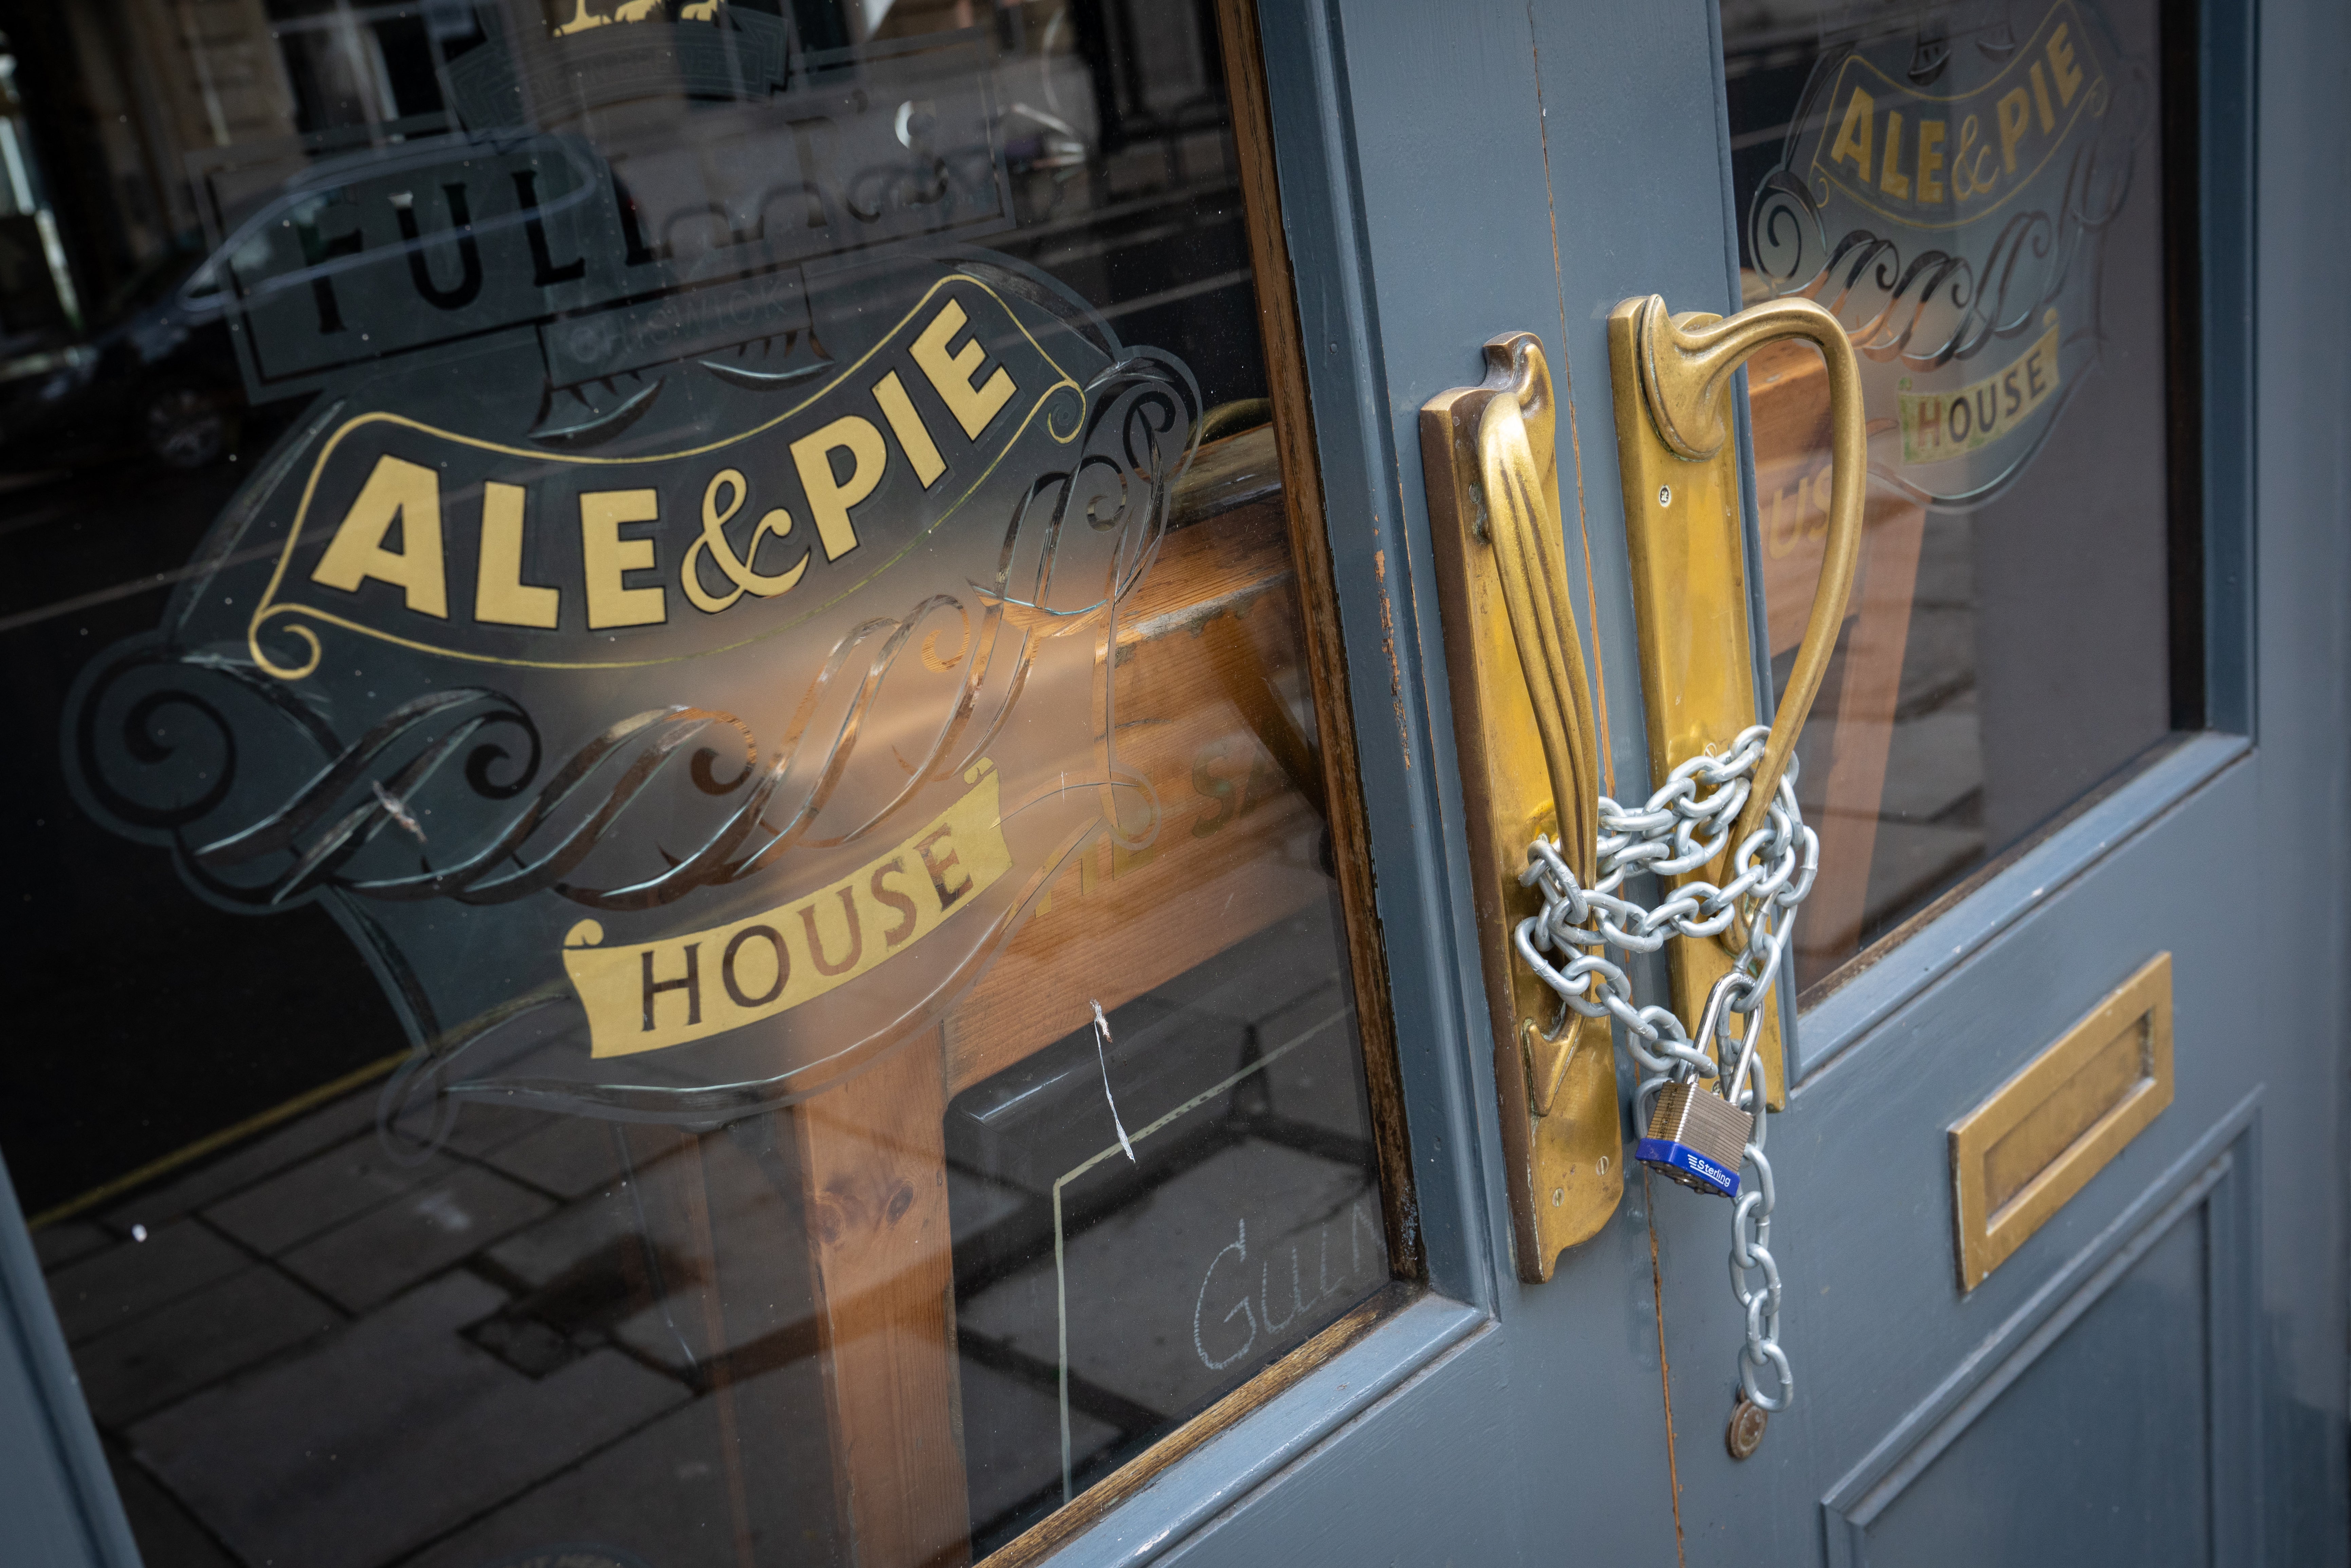 Doors of a closed pub in London. Pub, restaurants and other hospitality venues have warned that rocketing energy prices could lead to closures without support (Dominic Lipinski/PA)